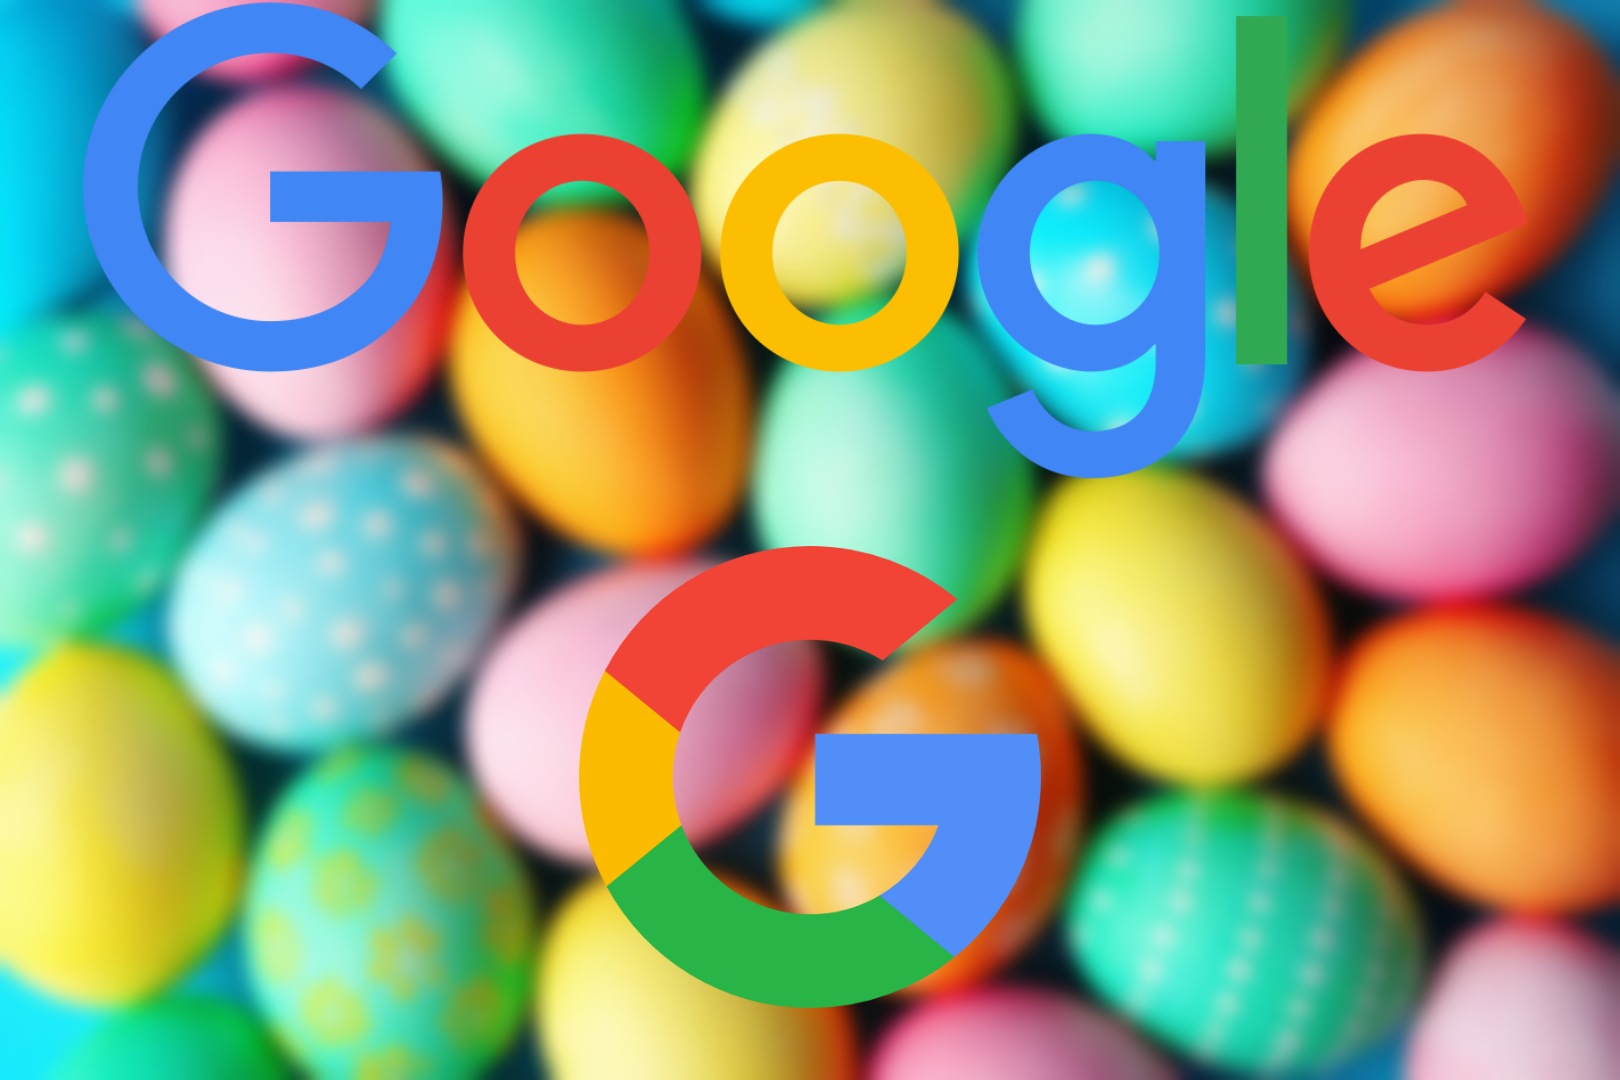 The Definitive List of Google Search Easter Eggs